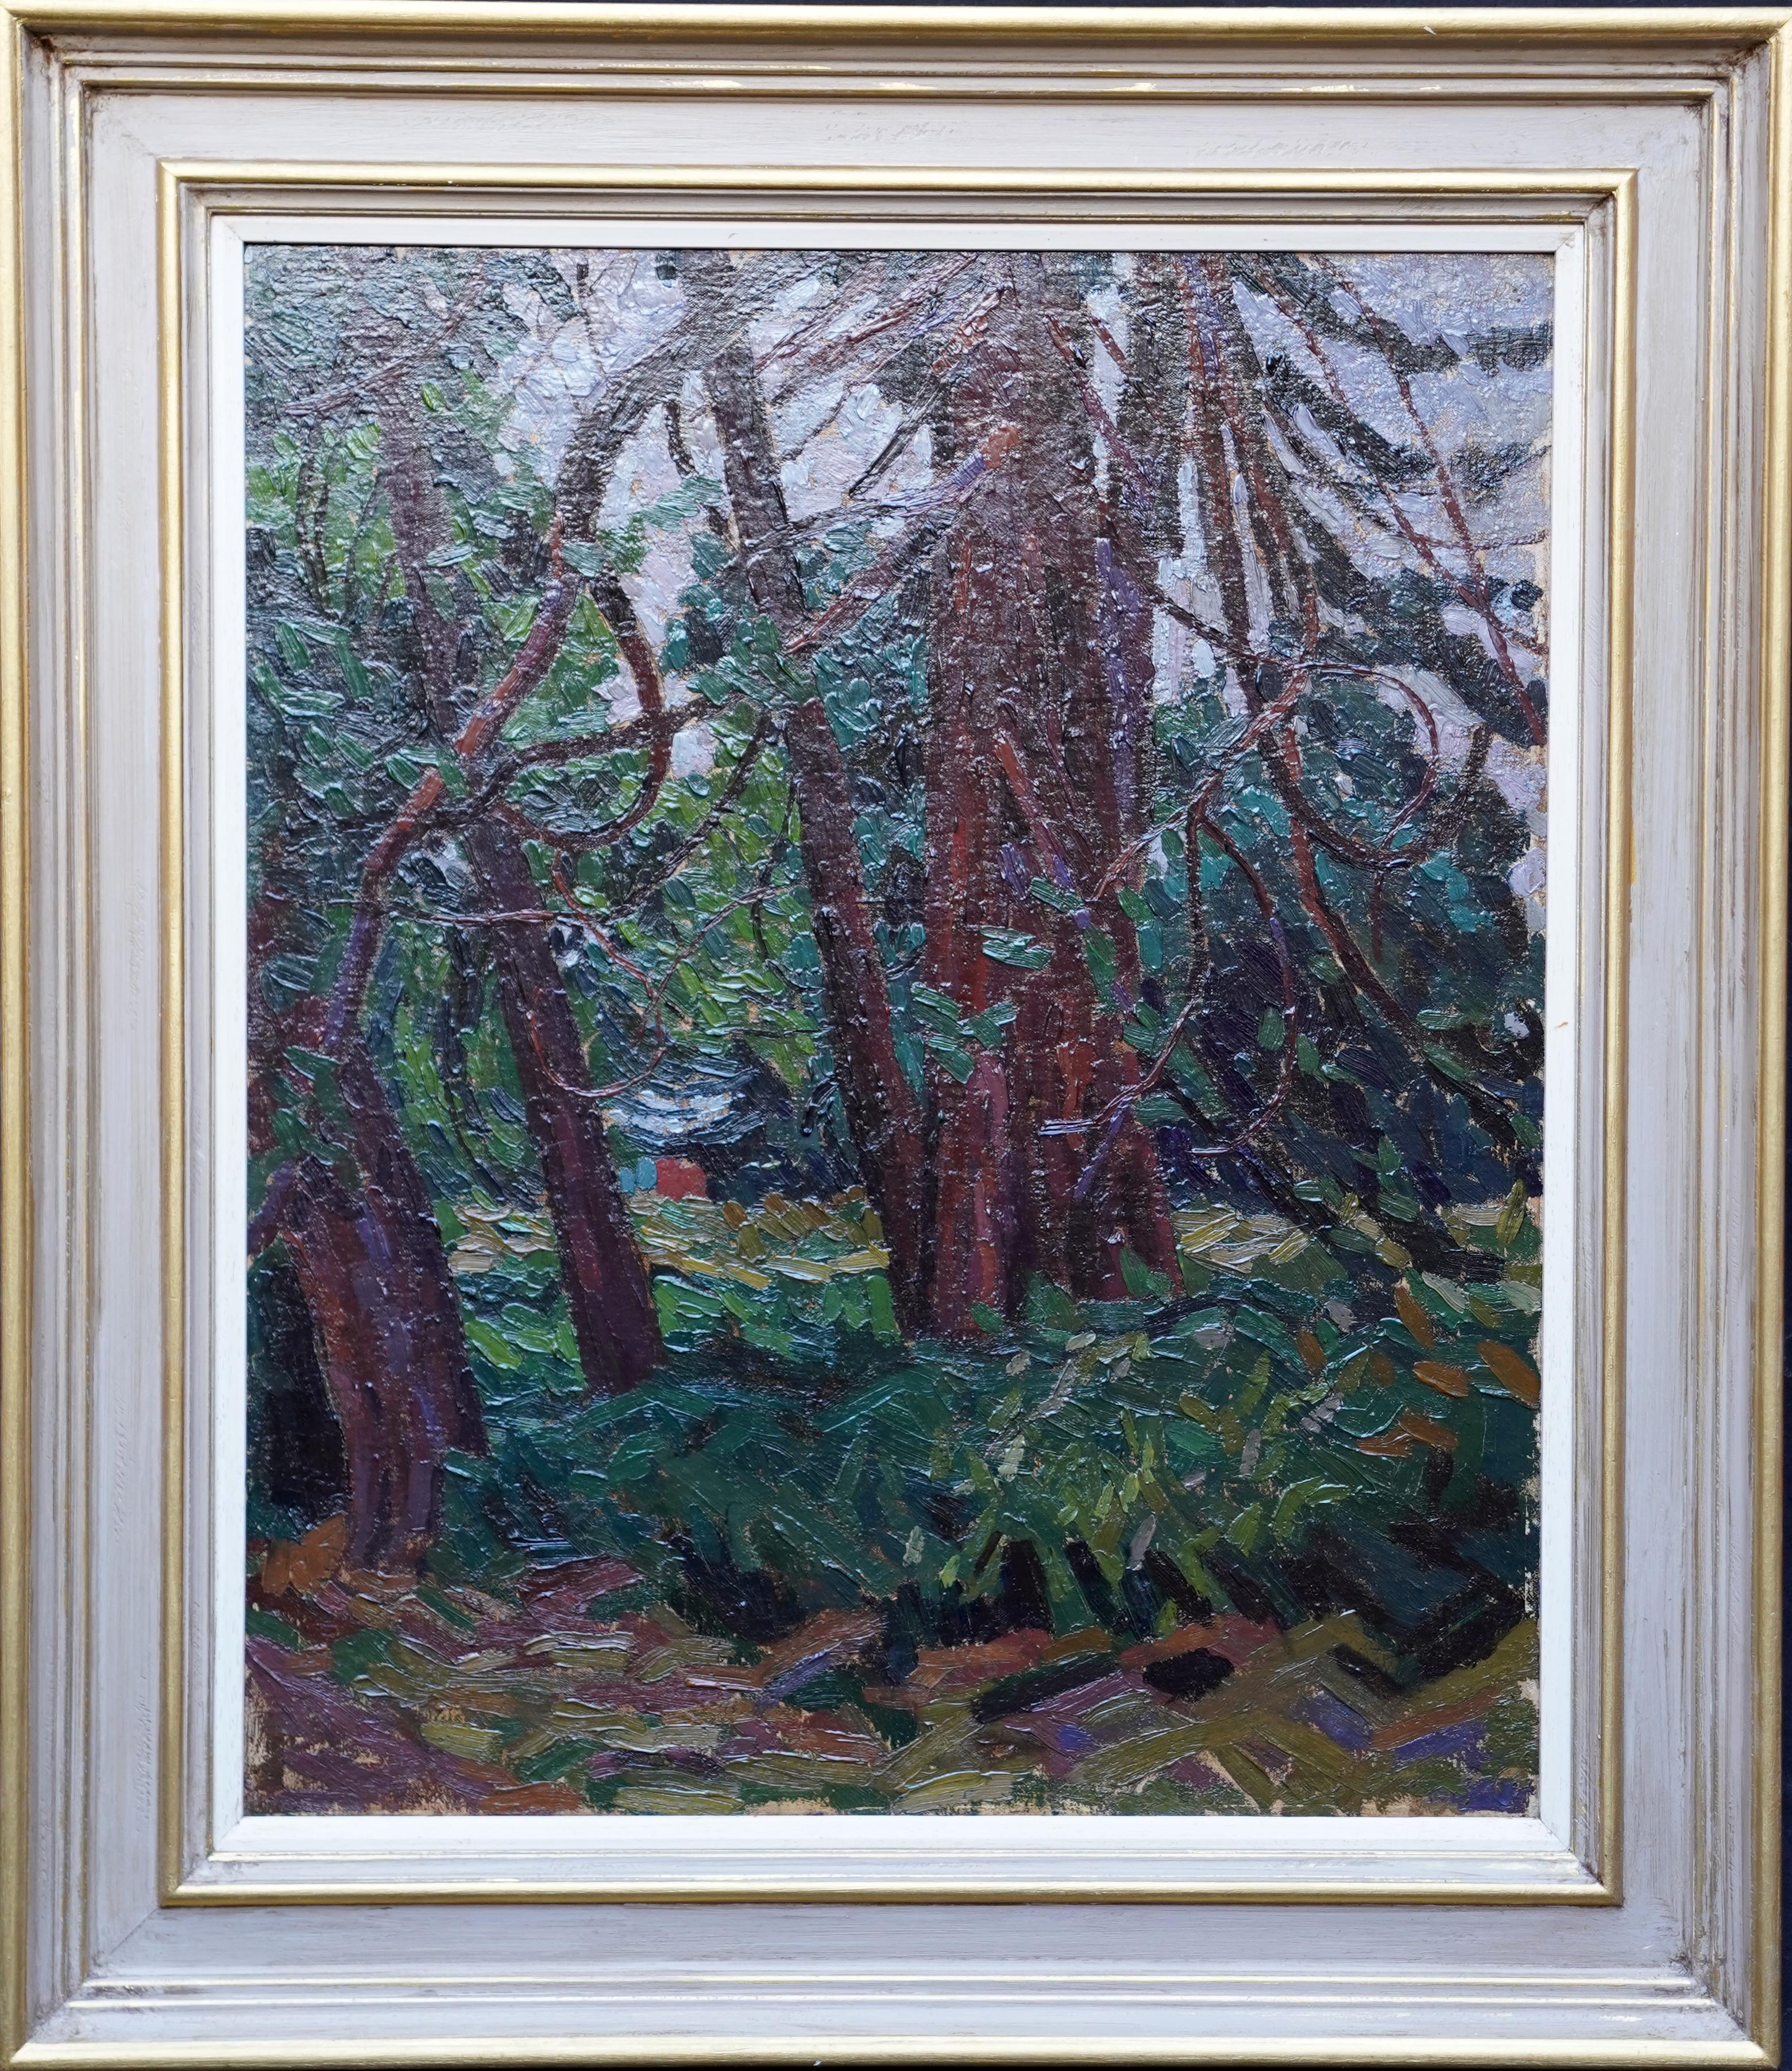 Peter L. Field Landscape Painting - View Through Trees - British Post Impressionist 50's art landscape oil painting